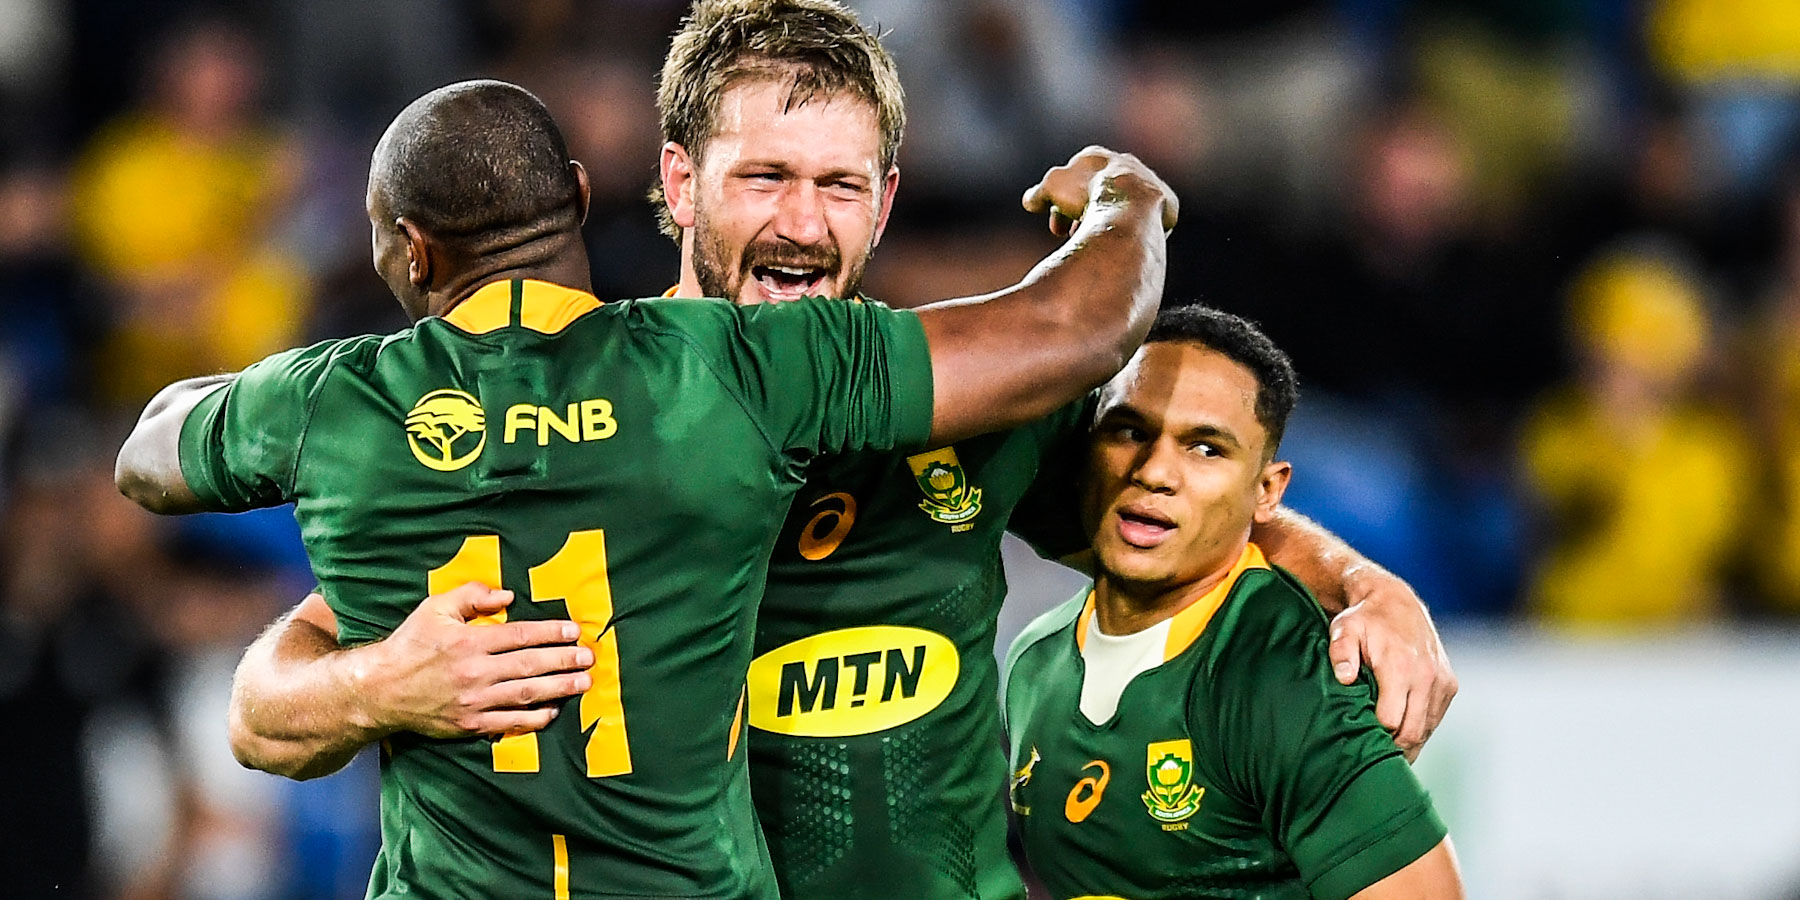 Frans Steyn is back in the Bok squad after missing the series against Wales.